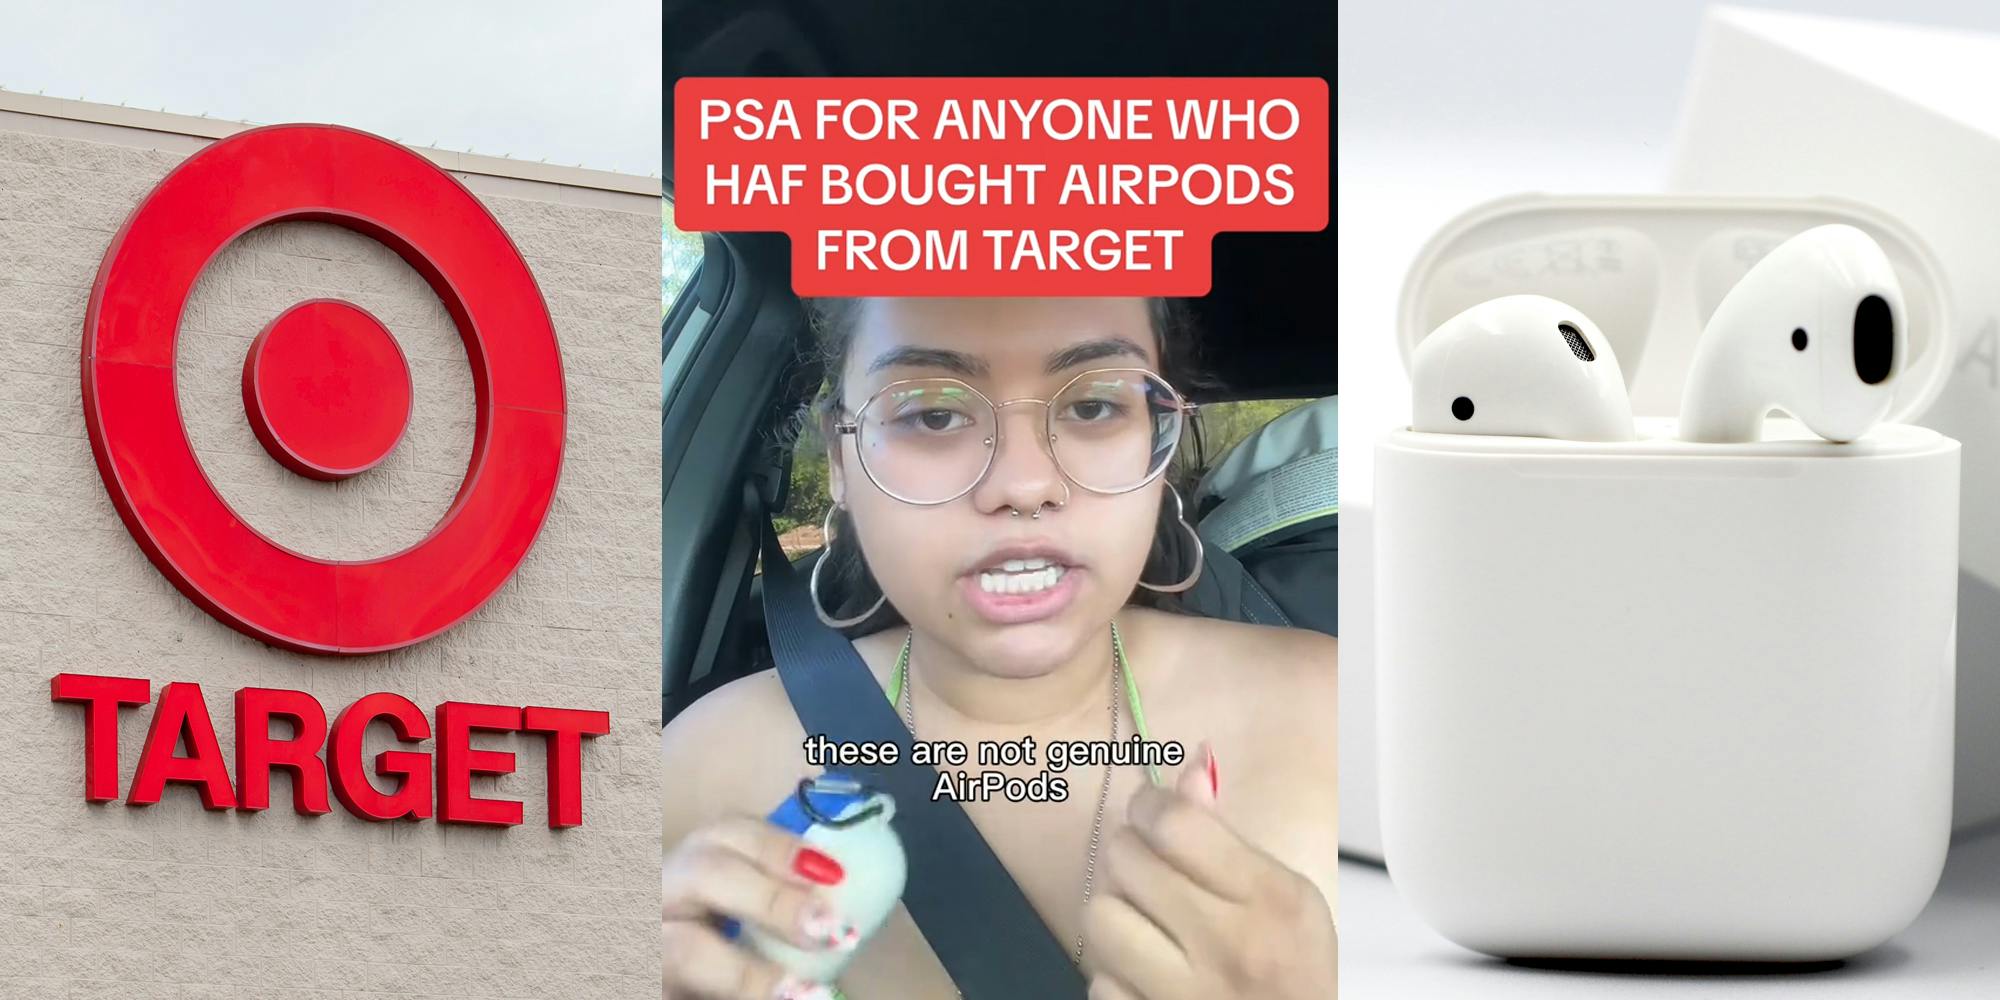 Target sign on building (l) Target customer speaking in car with caption "PSA FOR ANYONE WHO HAF BOUGHT AIRPODS FROM TARGET these are not genuine AirPods" (c) Apple AirPods in case in front of box in front of white background (r)